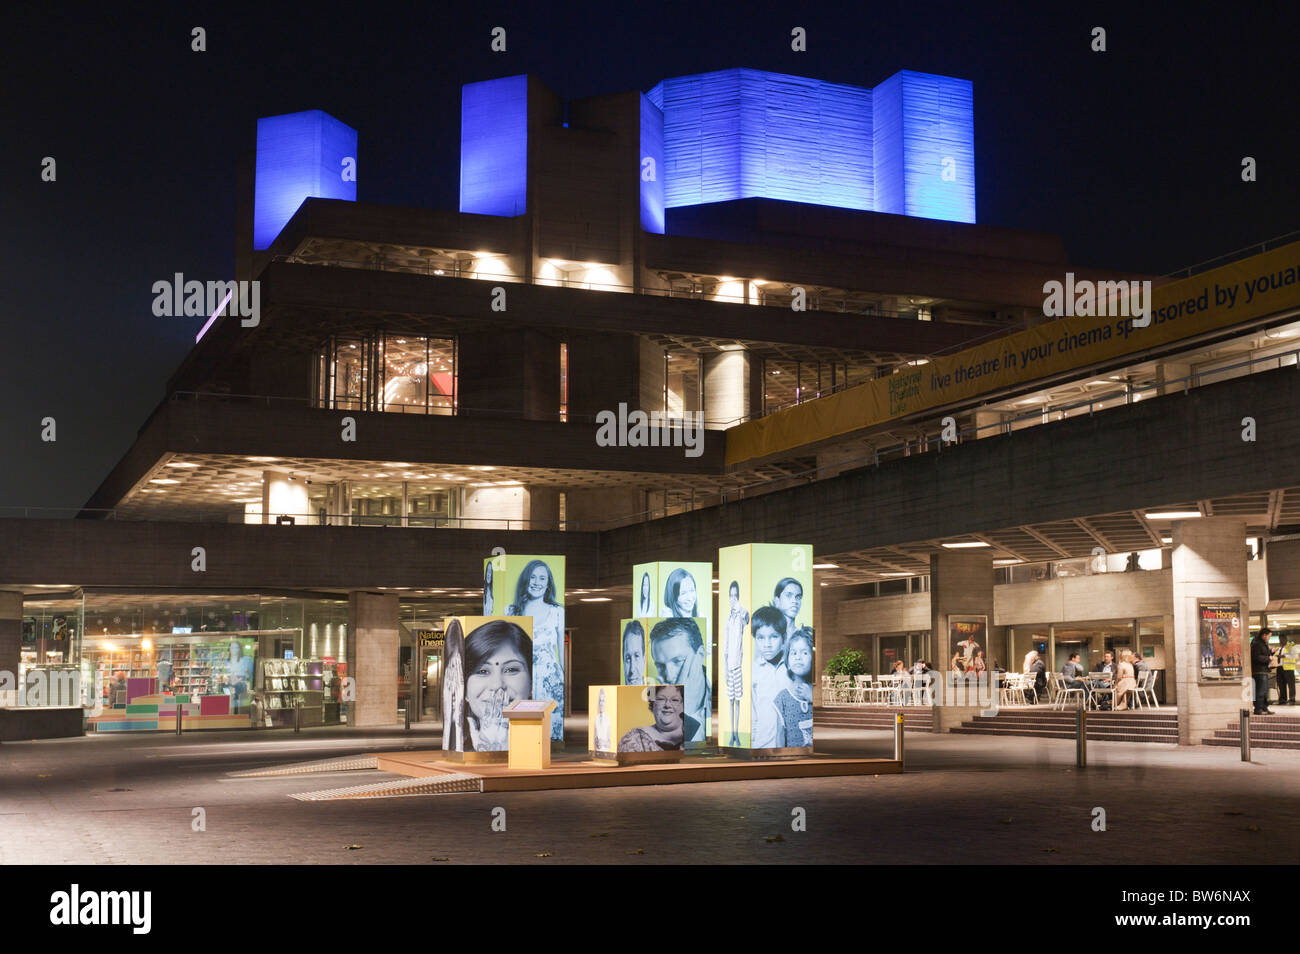 National Theatre - South Bank - London Stock Photo